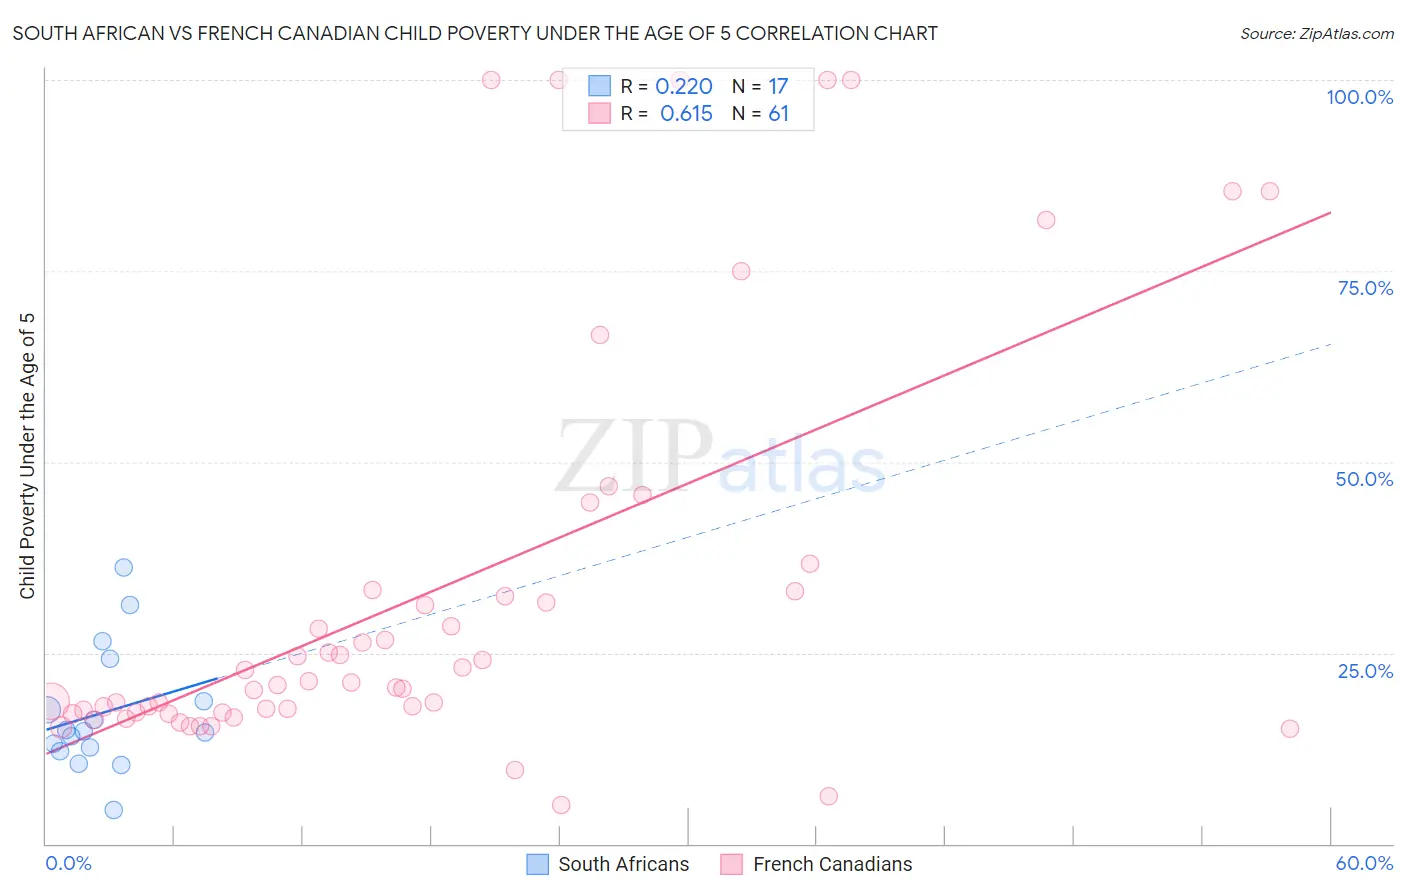 South African vs French Canadian Child Poverty Under the Age of 5